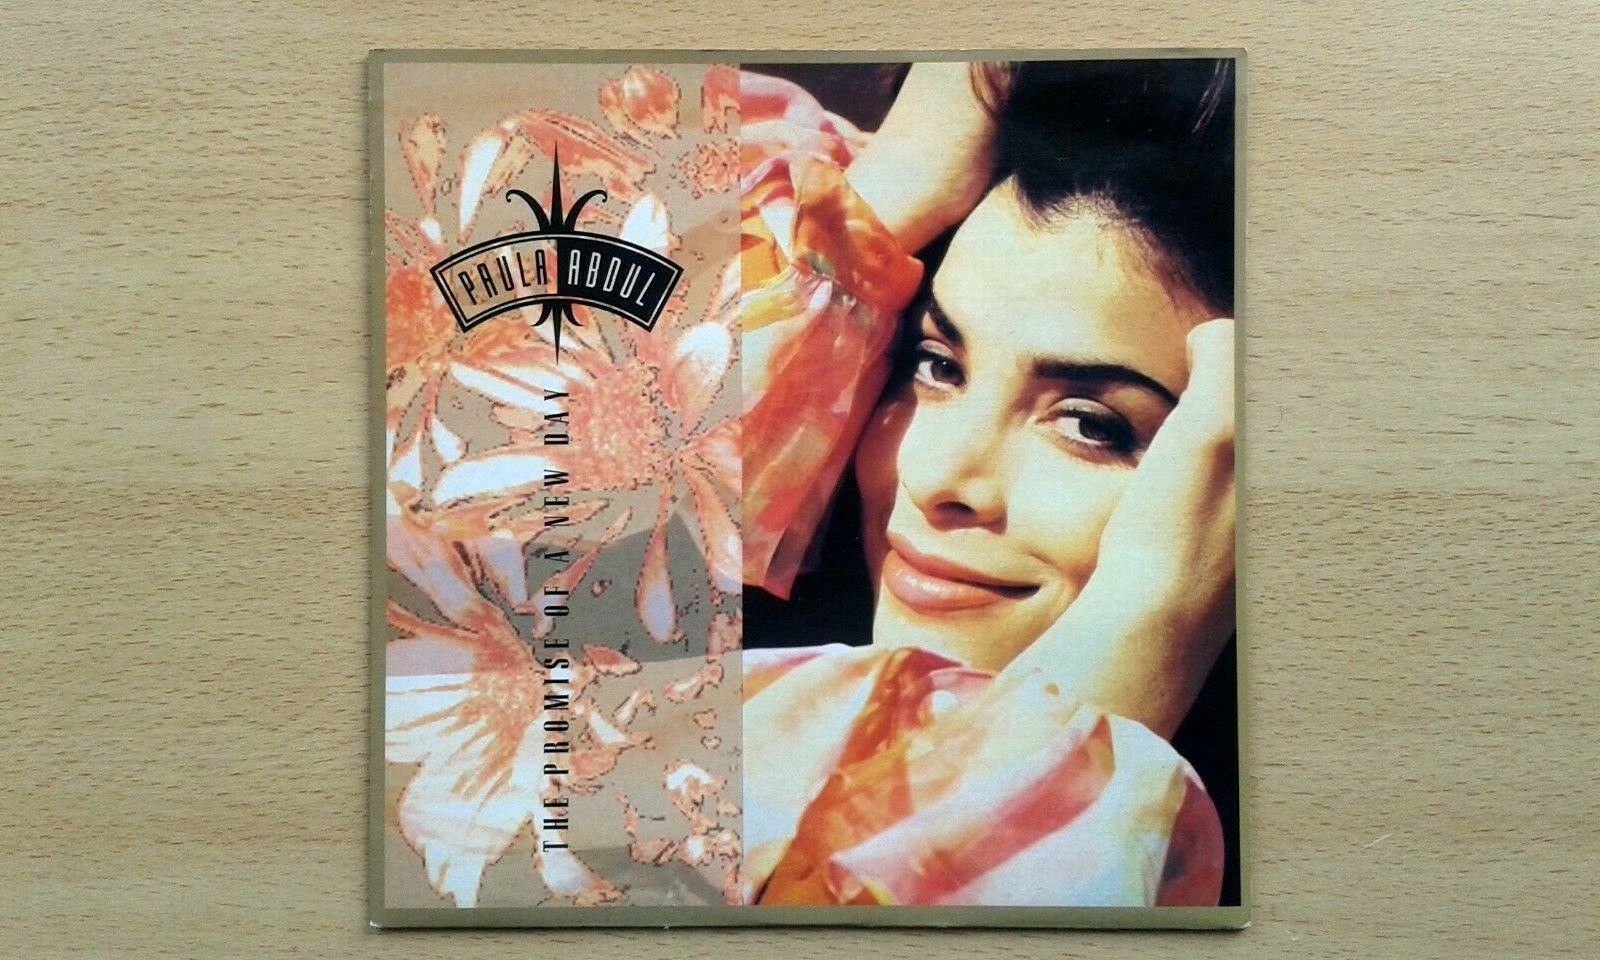 PAULA  ABDUL " THE PROMISE OF A NEW DAY" 7" SINGLE 1991 N/MINT